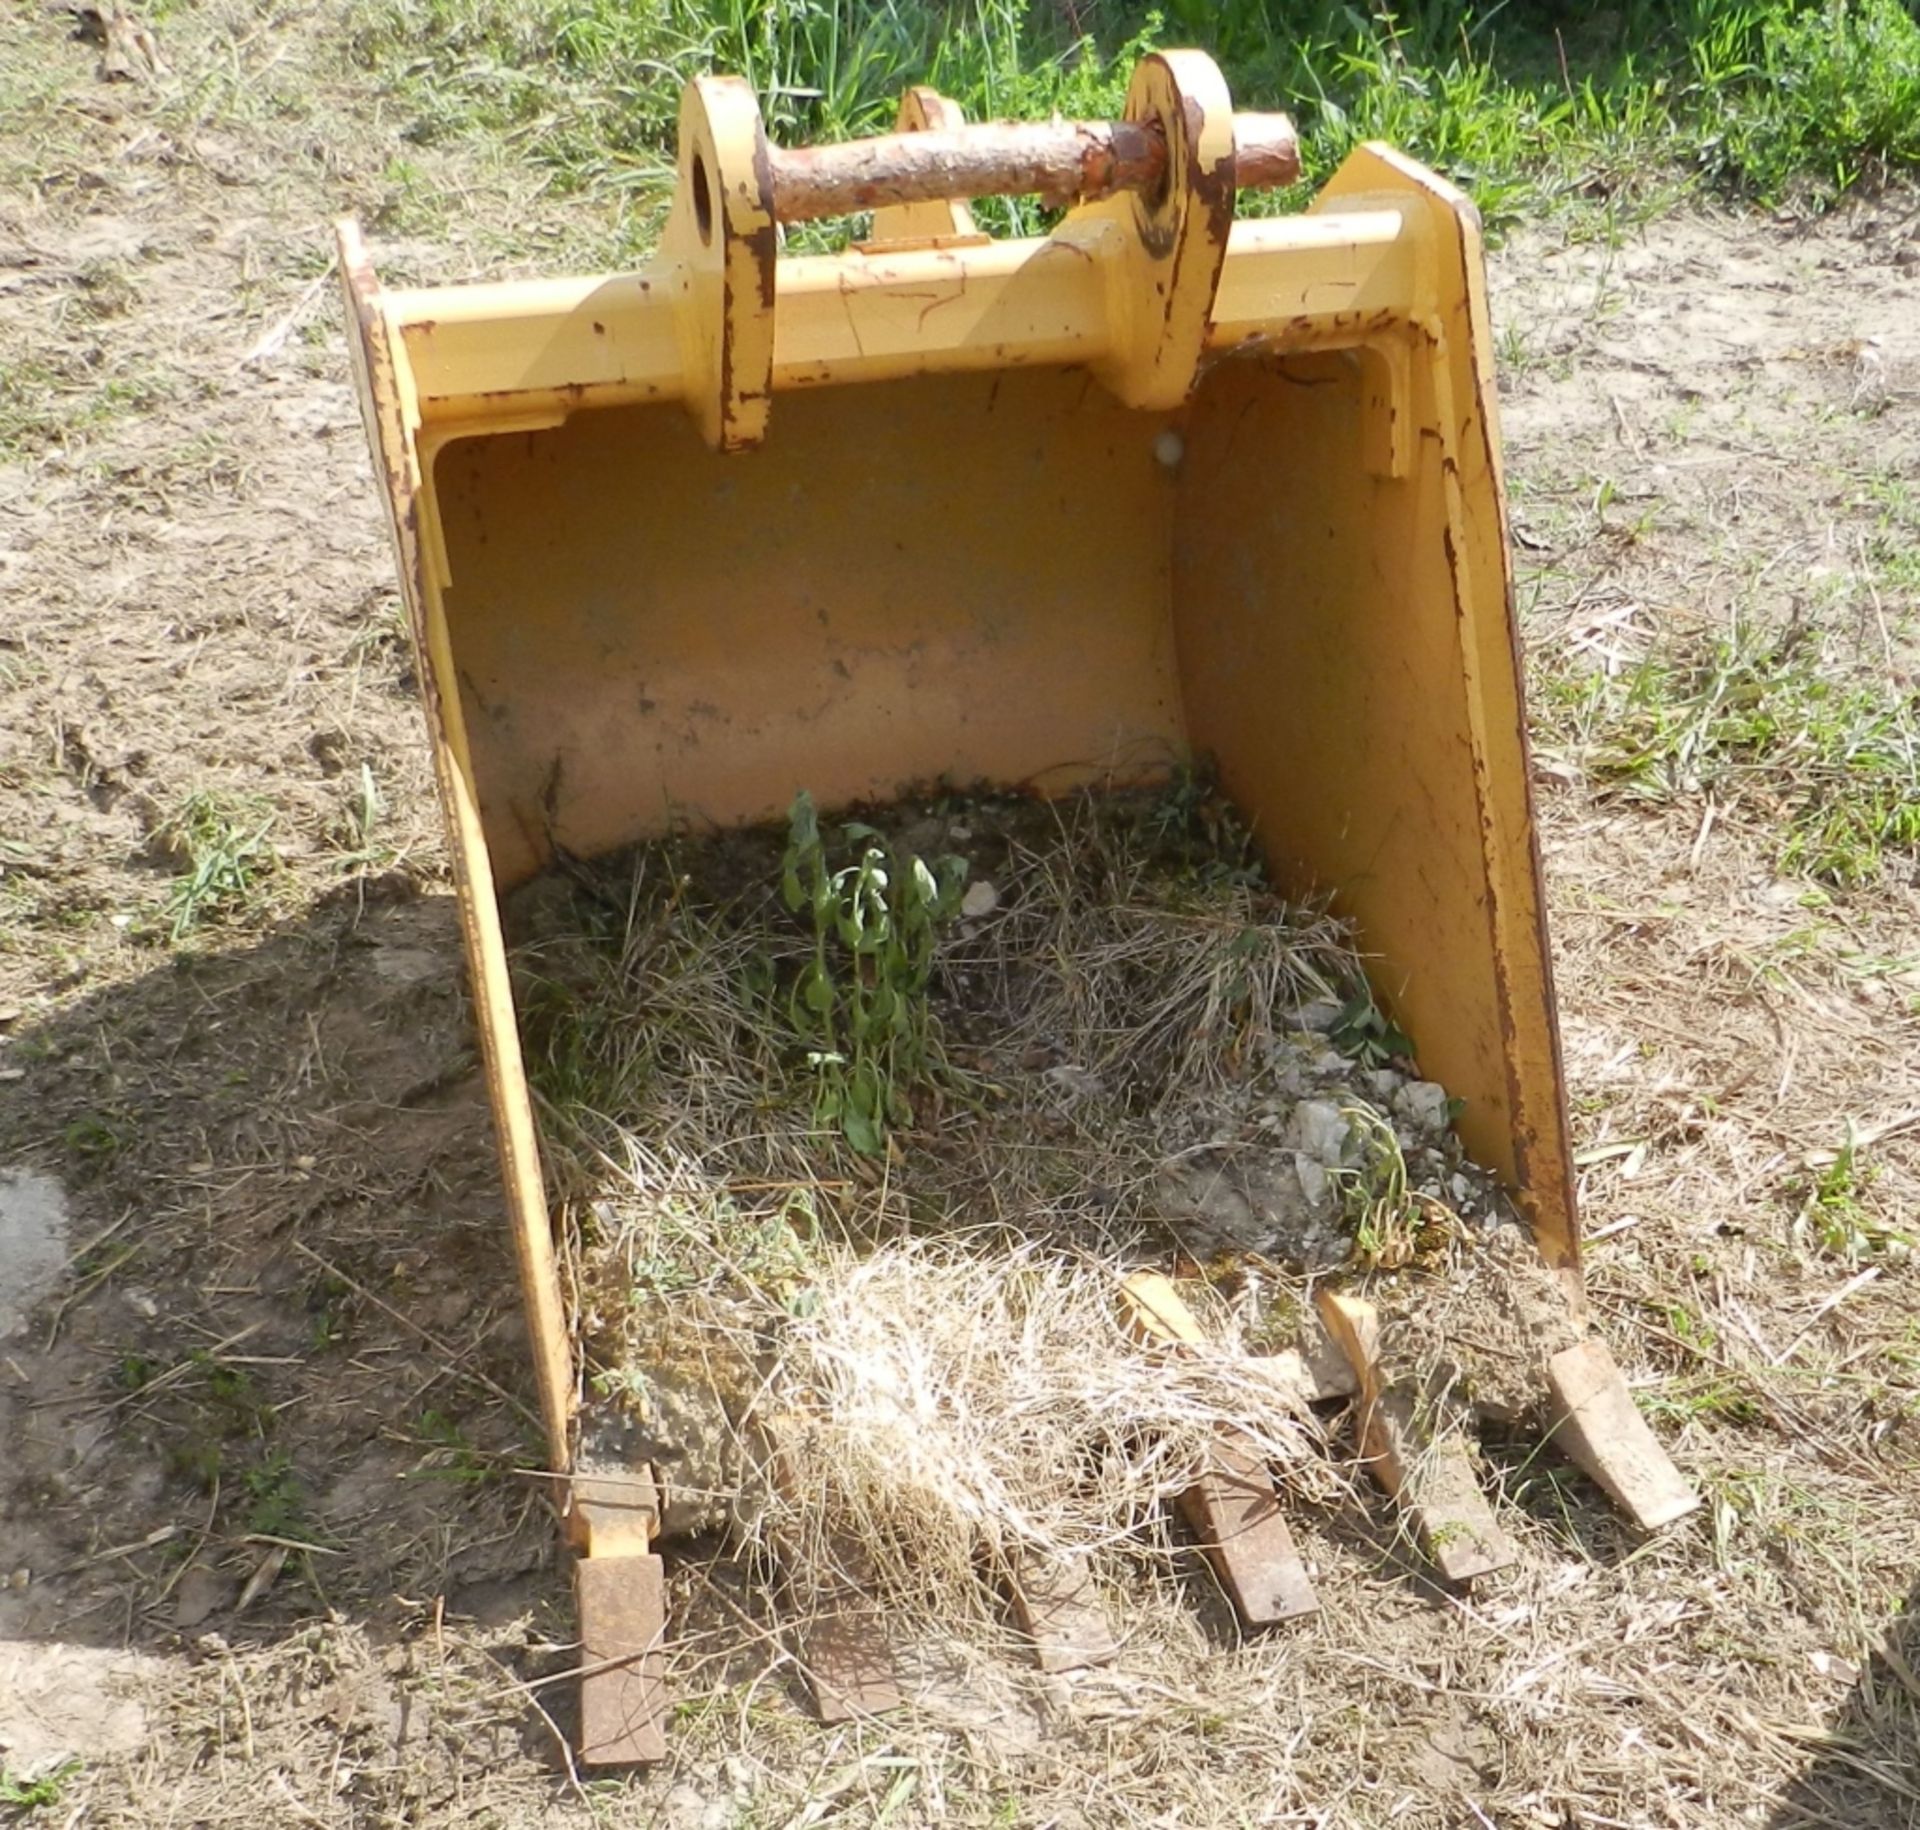 28" 6 TOOTH TRENCHING BUCKET